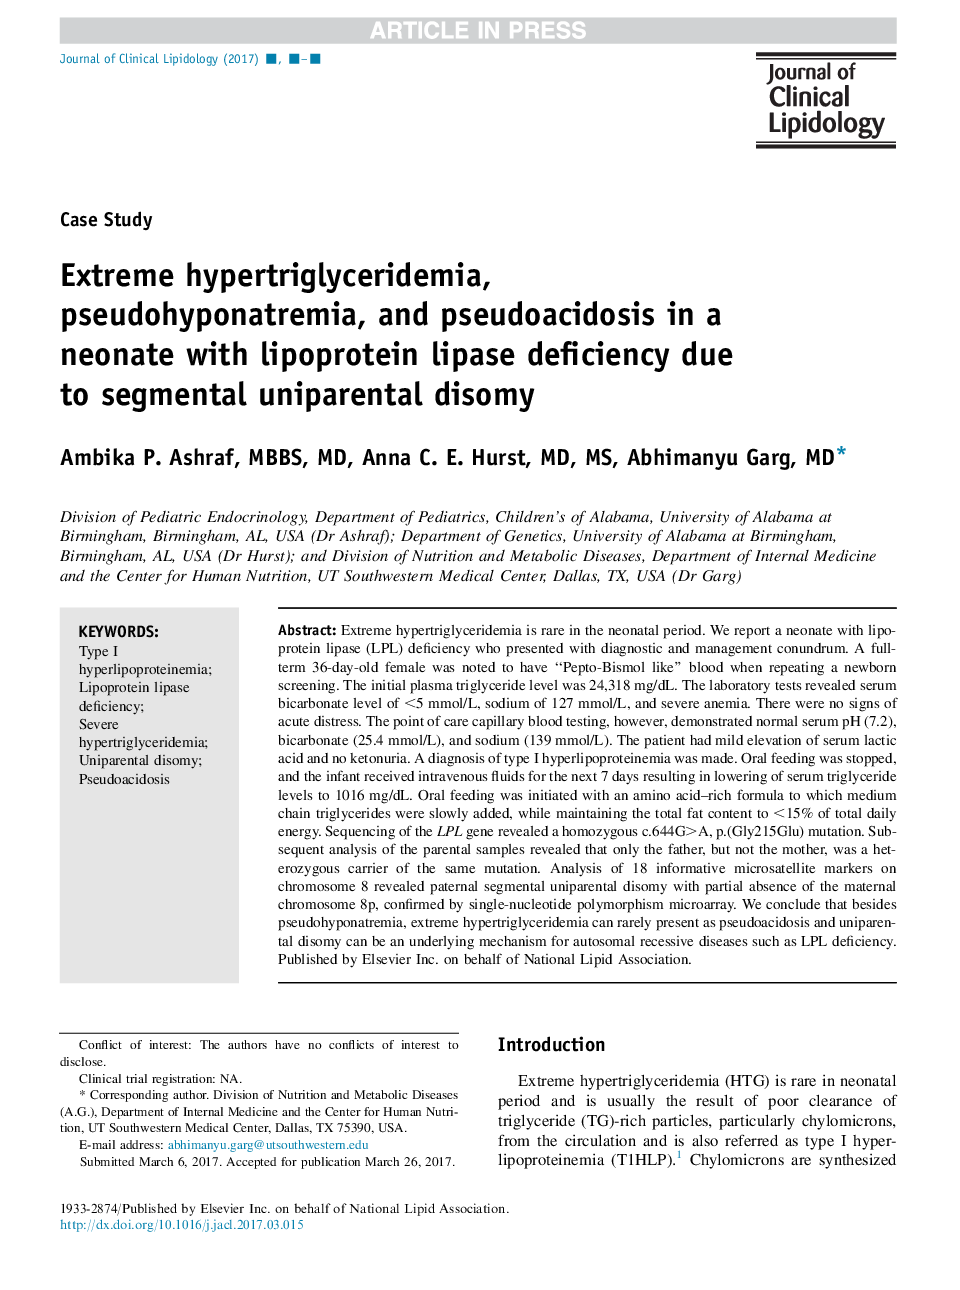 Extreme hypertriglyceridemia, pseudohyponatremia, and pseudoacidosis in a neonate with lipoprotein lipase deficiency due to segmental uniparental disomy